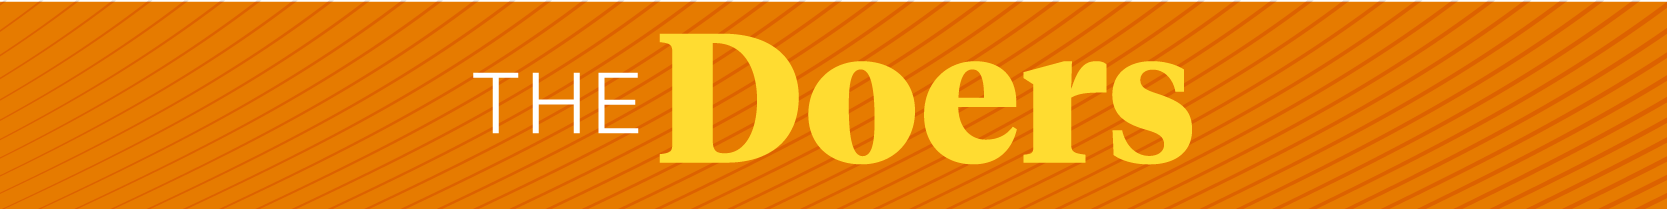 The Doers banner